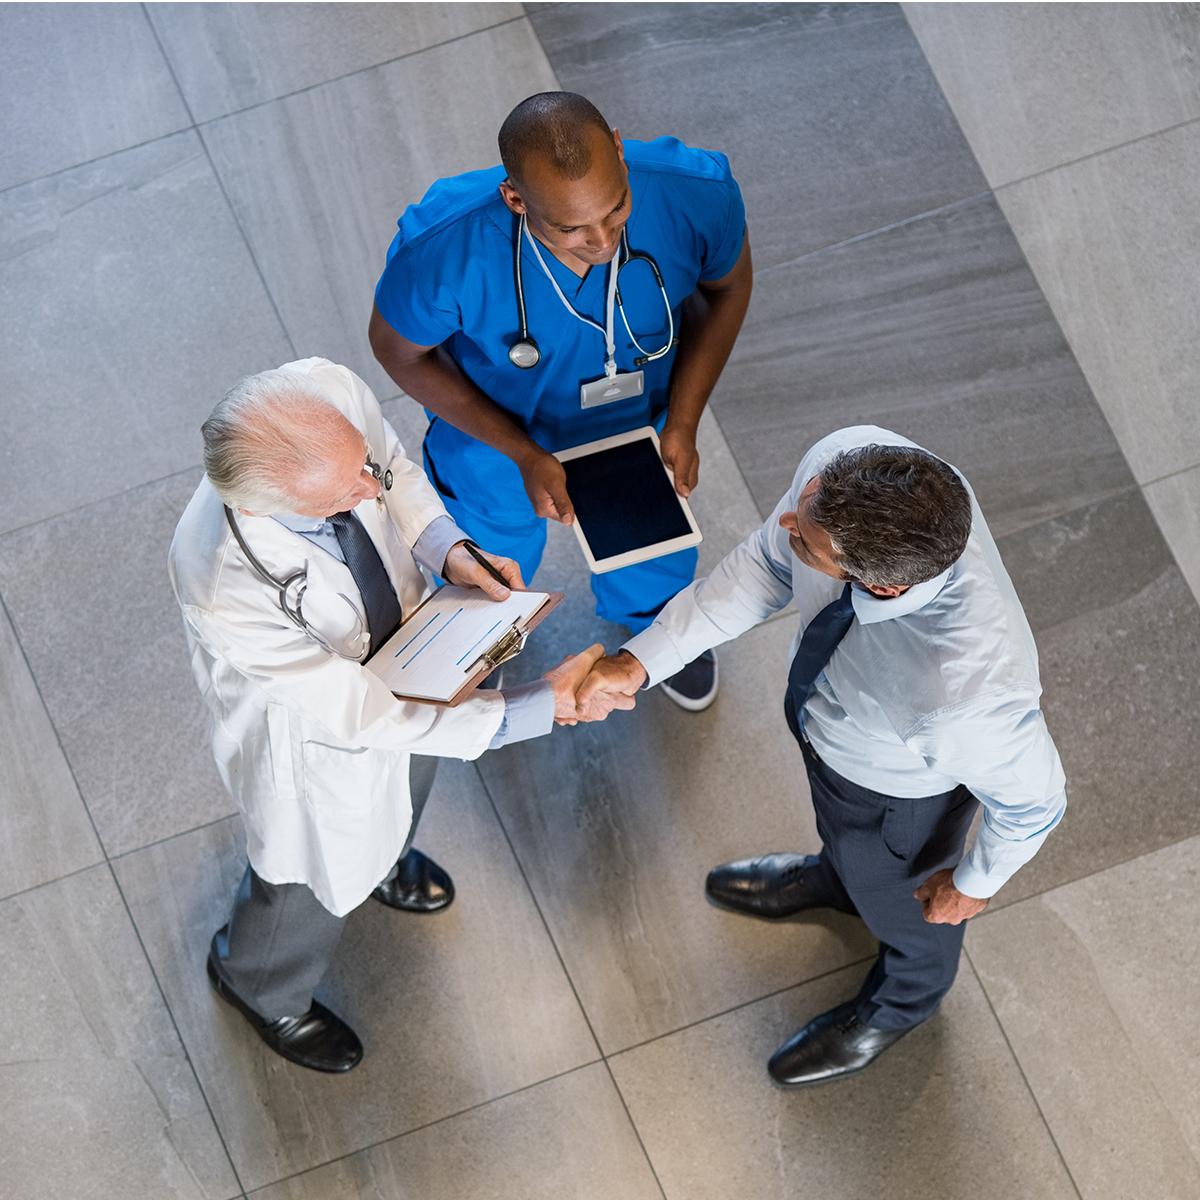 Clinician in blue scrubs with a tablet and physician in white lab coat, speaking to a man in business attire